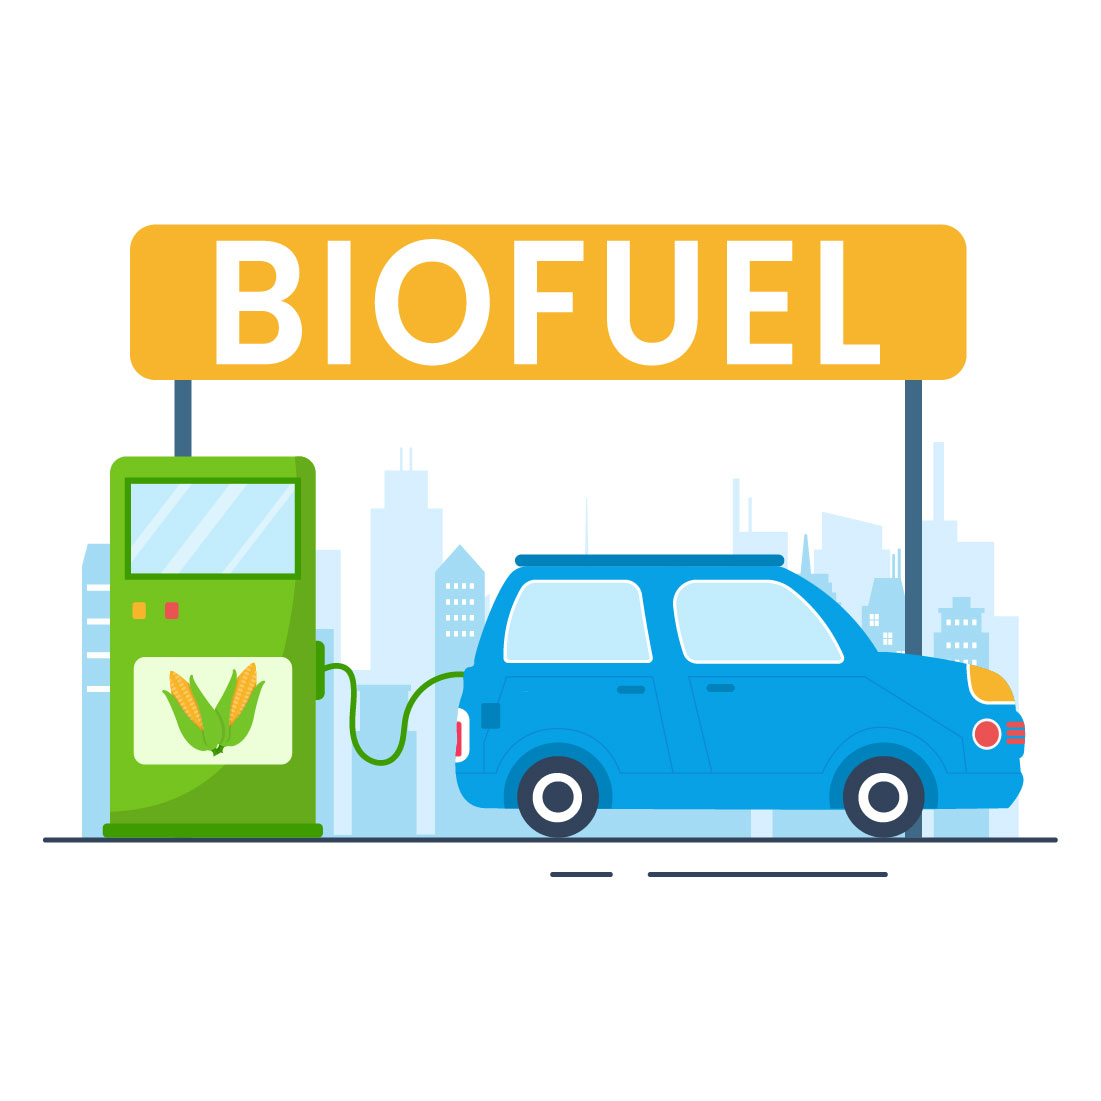 Biofuel Life Cycle Illustration cover image.